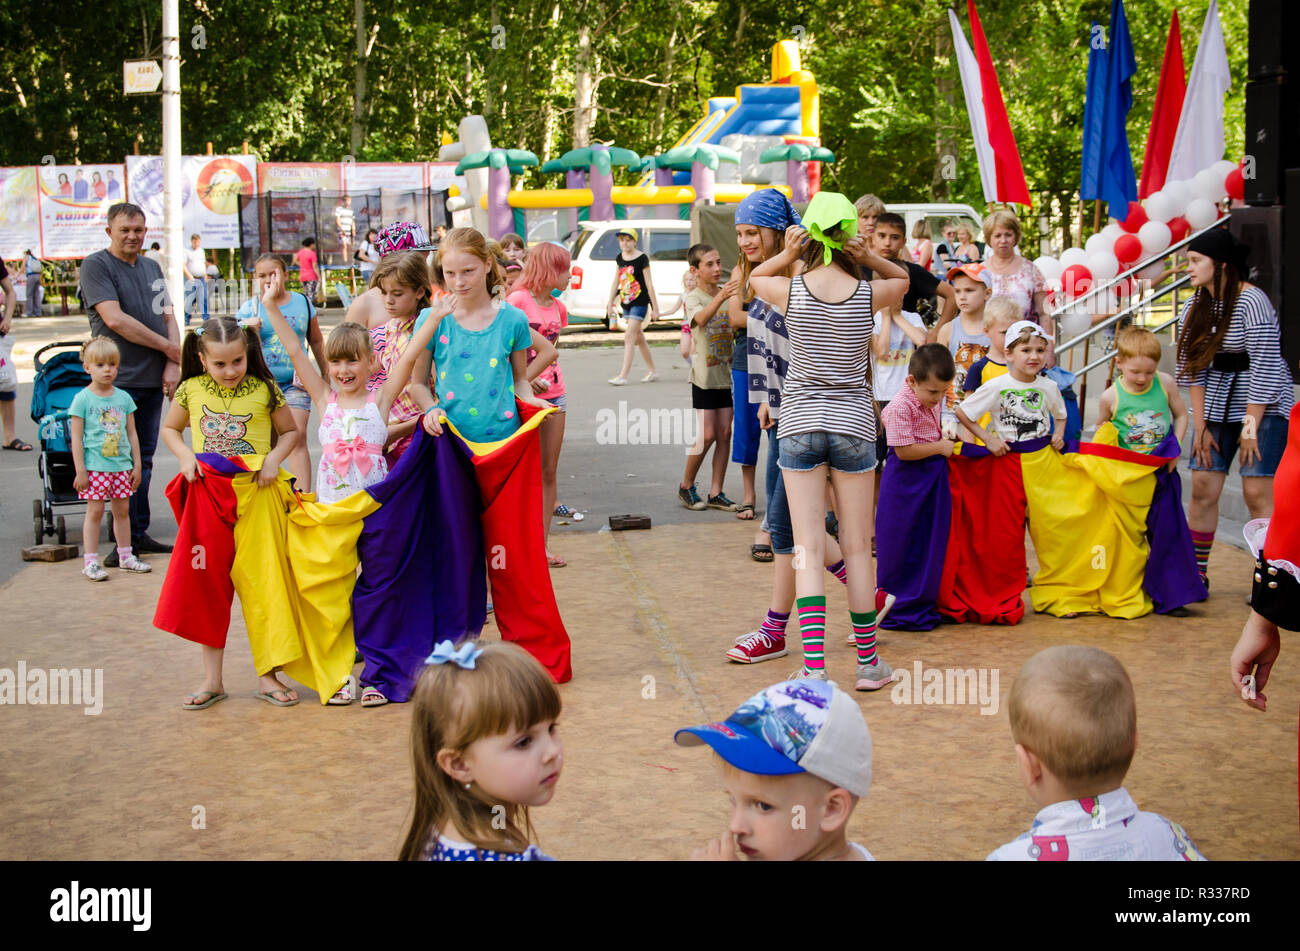 Komsomolsk-on-Amur, Russia - August 1, 2016. Public open Railroader's day. two children teams ready to flee in sewn sacks at a pirate party Stock Photo